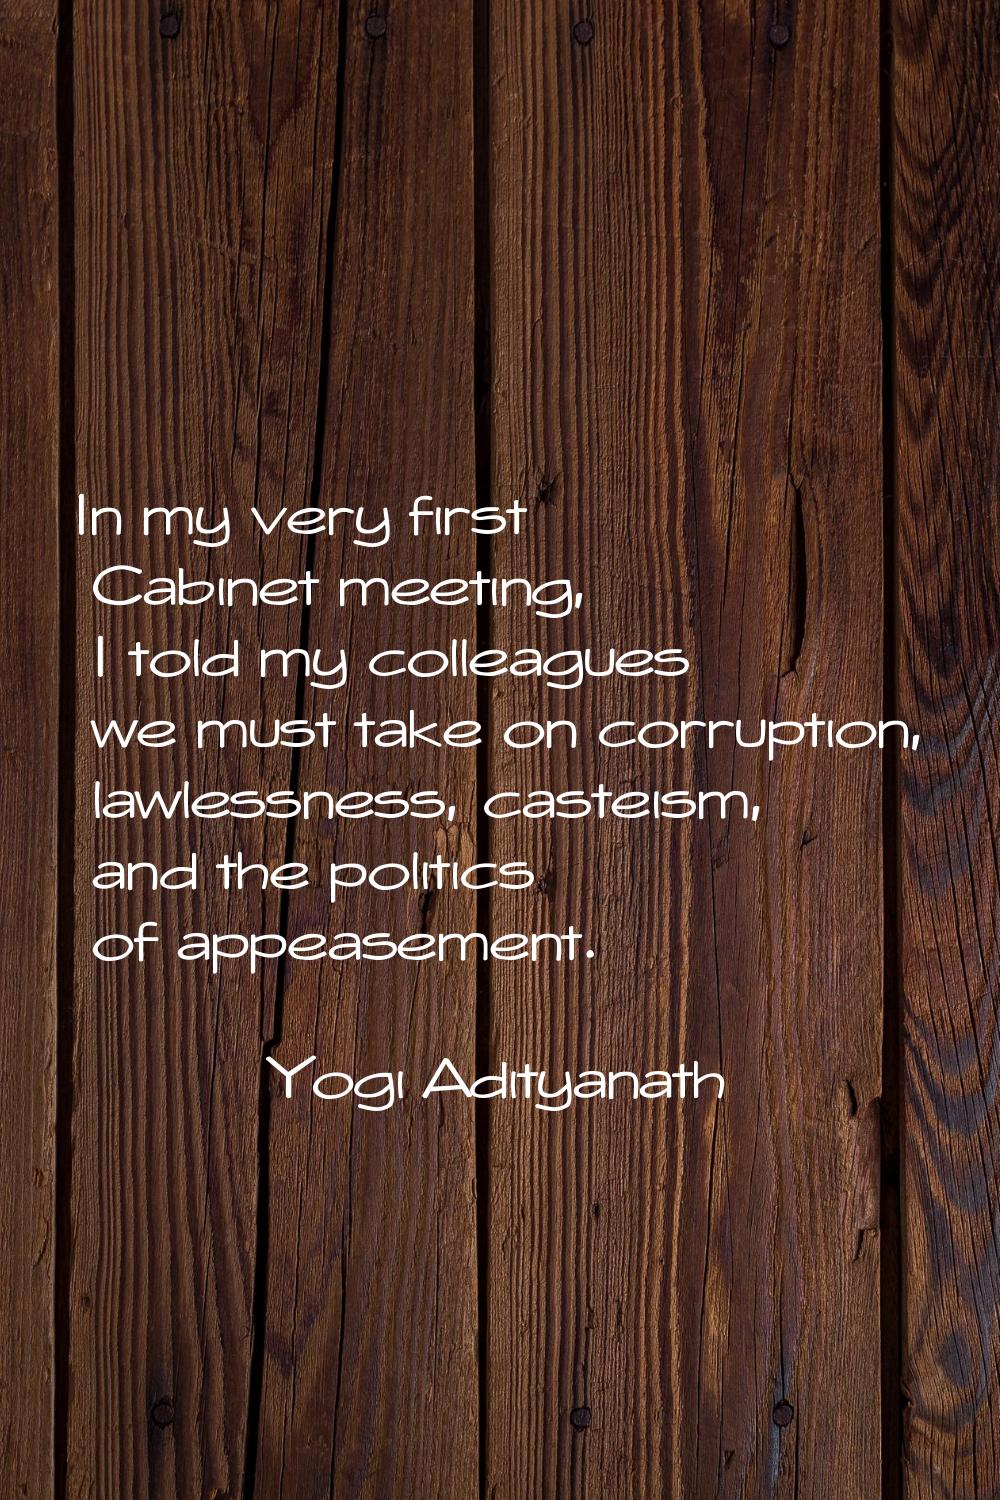 In my very first Cabinet meeting, I told my colleagues we must take on corruption, lawlessness, cas